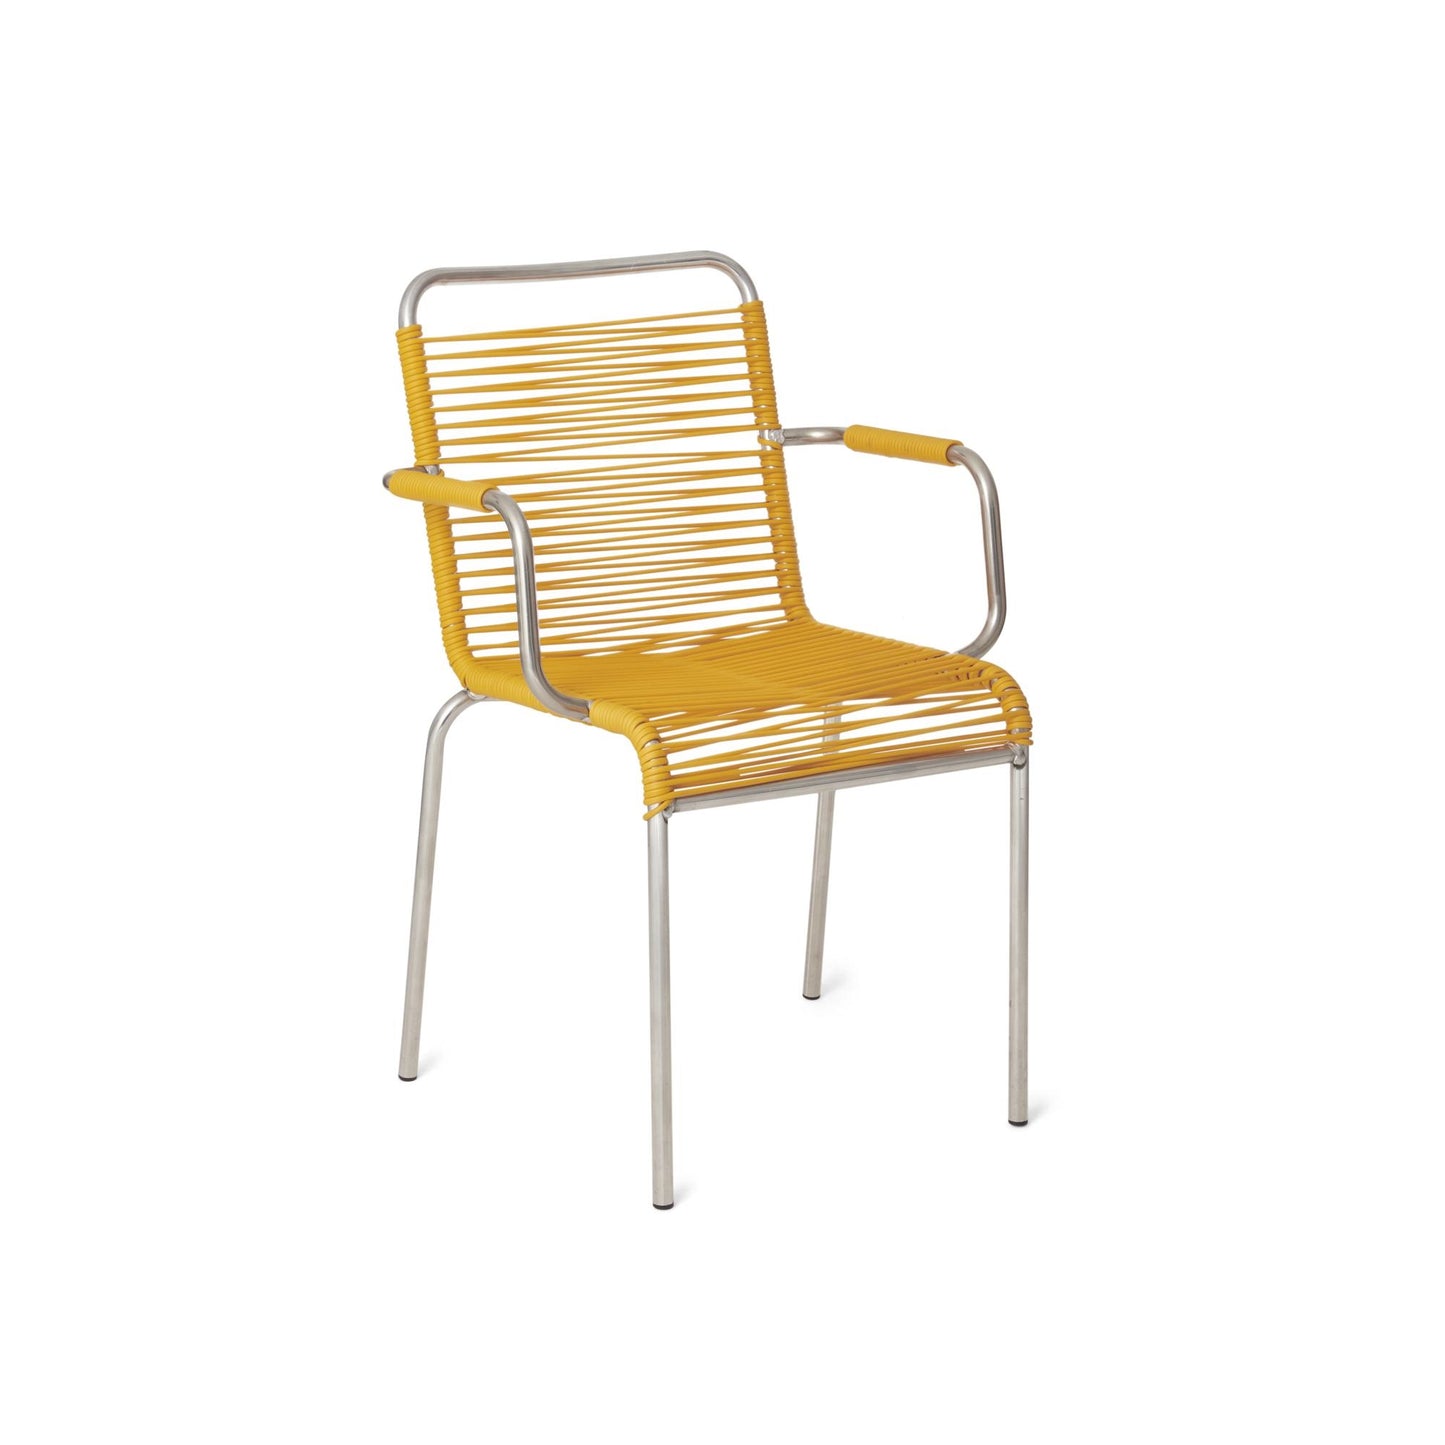 Mya Spaghetti Dining Chair with Armrests by Fiam #Yellow